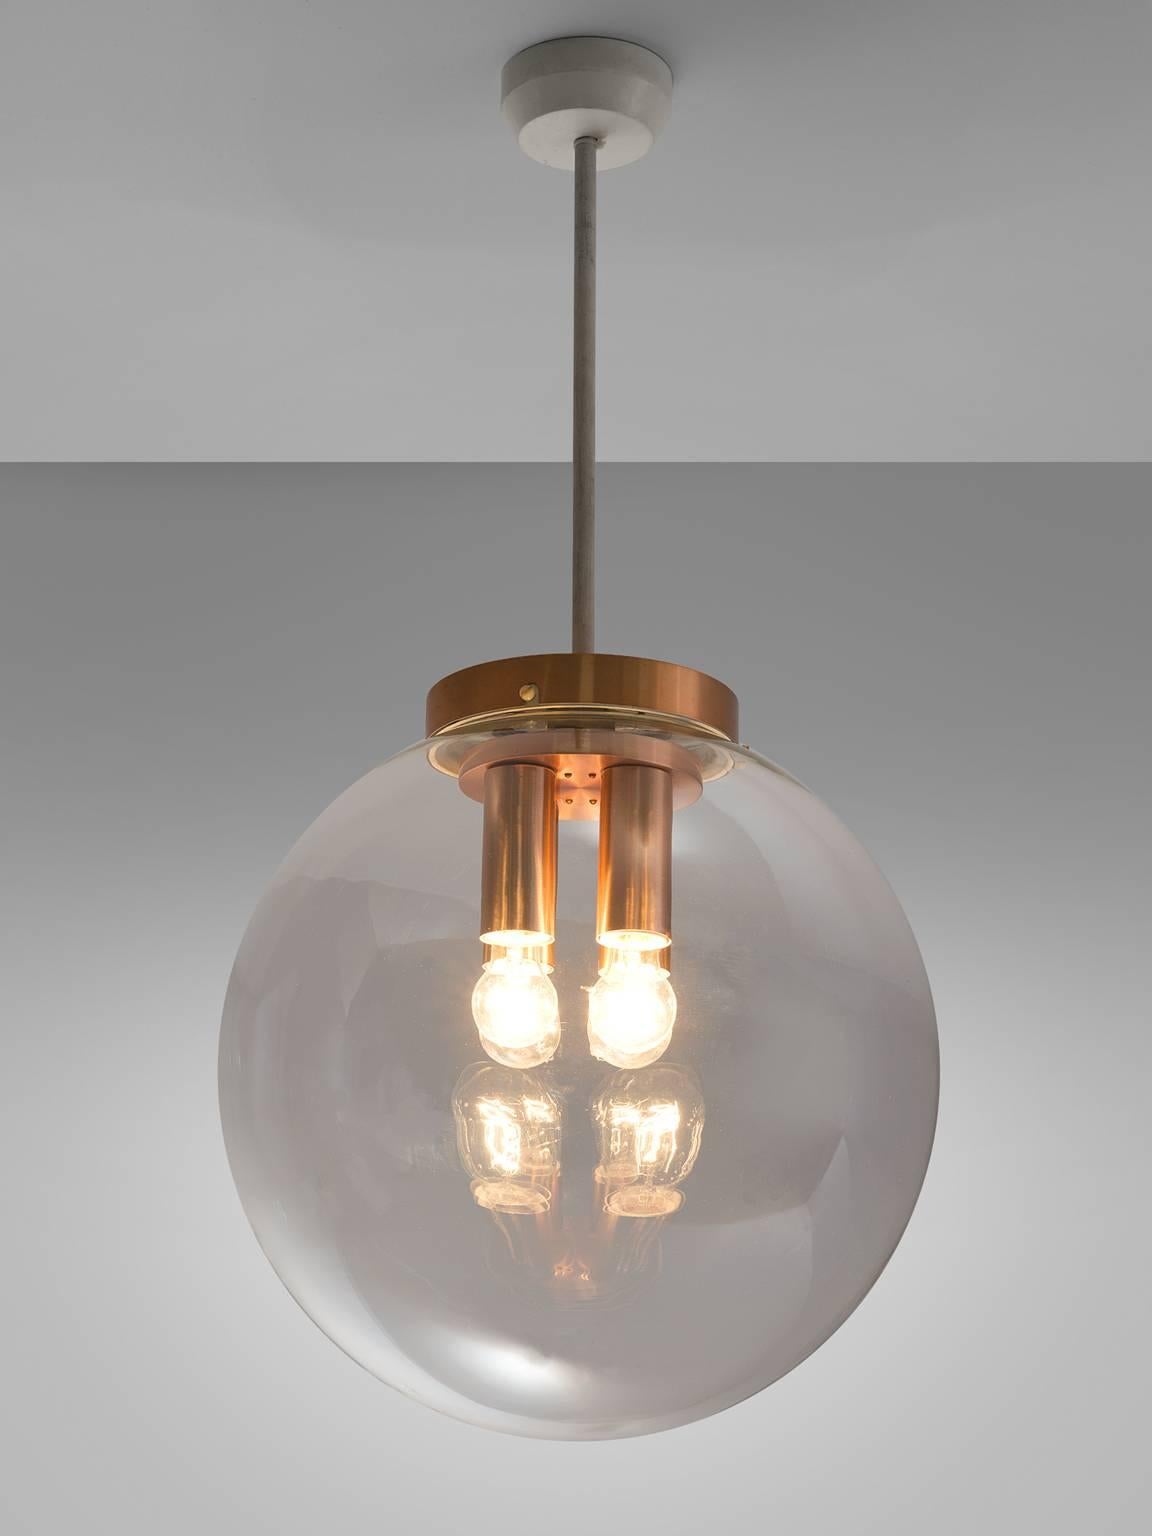 Pendant, in copper and glass, Europe, 1970s. 

This pendant with copper fixture is Minimalist and modest. The clear glass shade is attached to a circle copper plate that holds four different copper fixtures that hold a light bulb each. This results